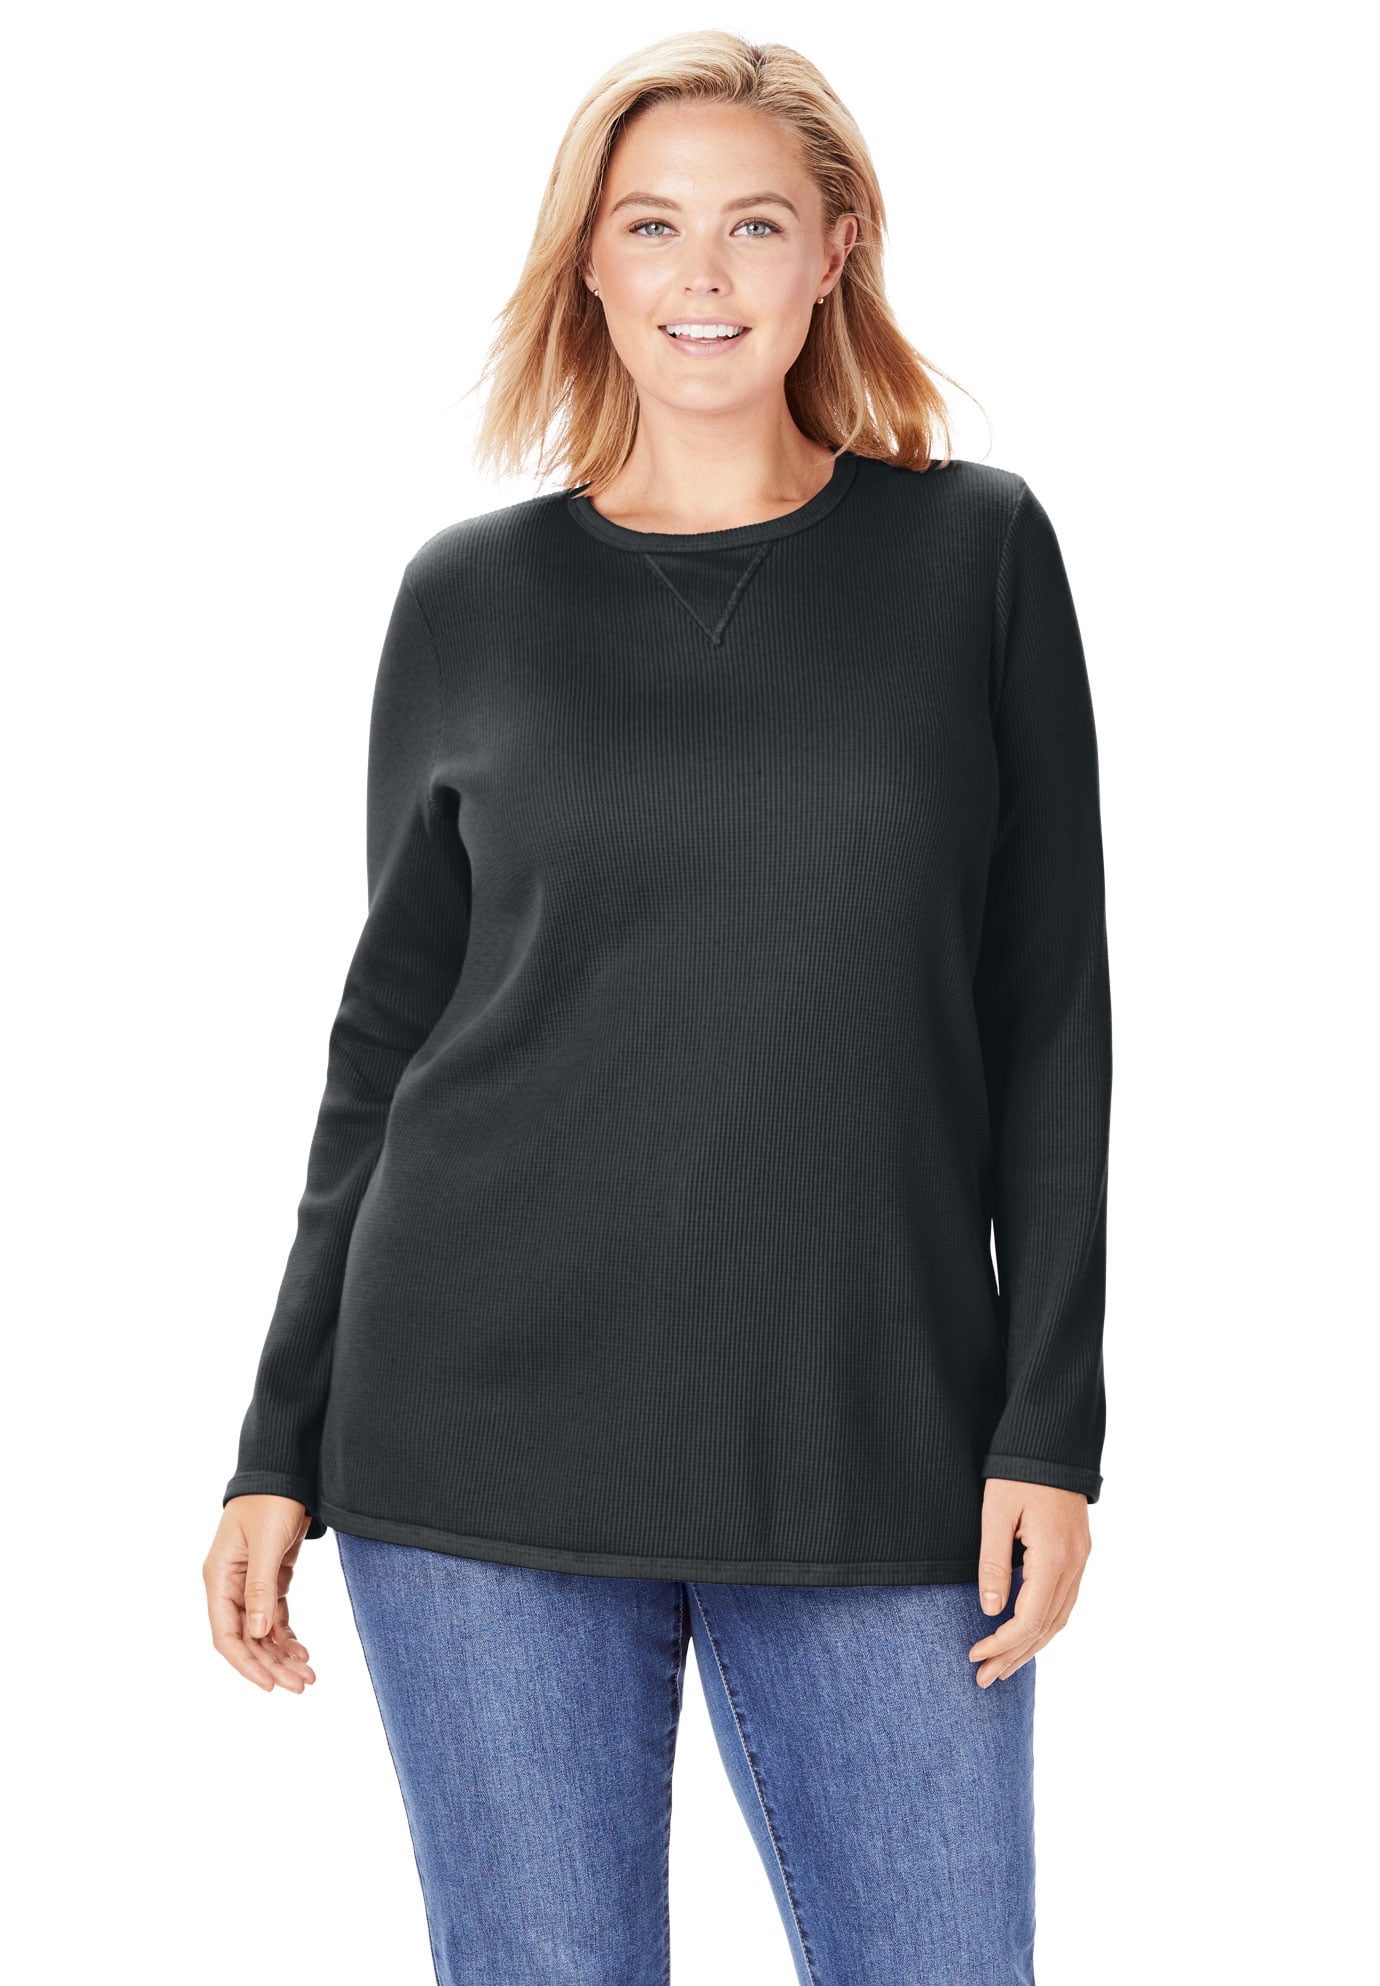 Woman Within - Woman Within Plus Size Thermal Sweatshirt